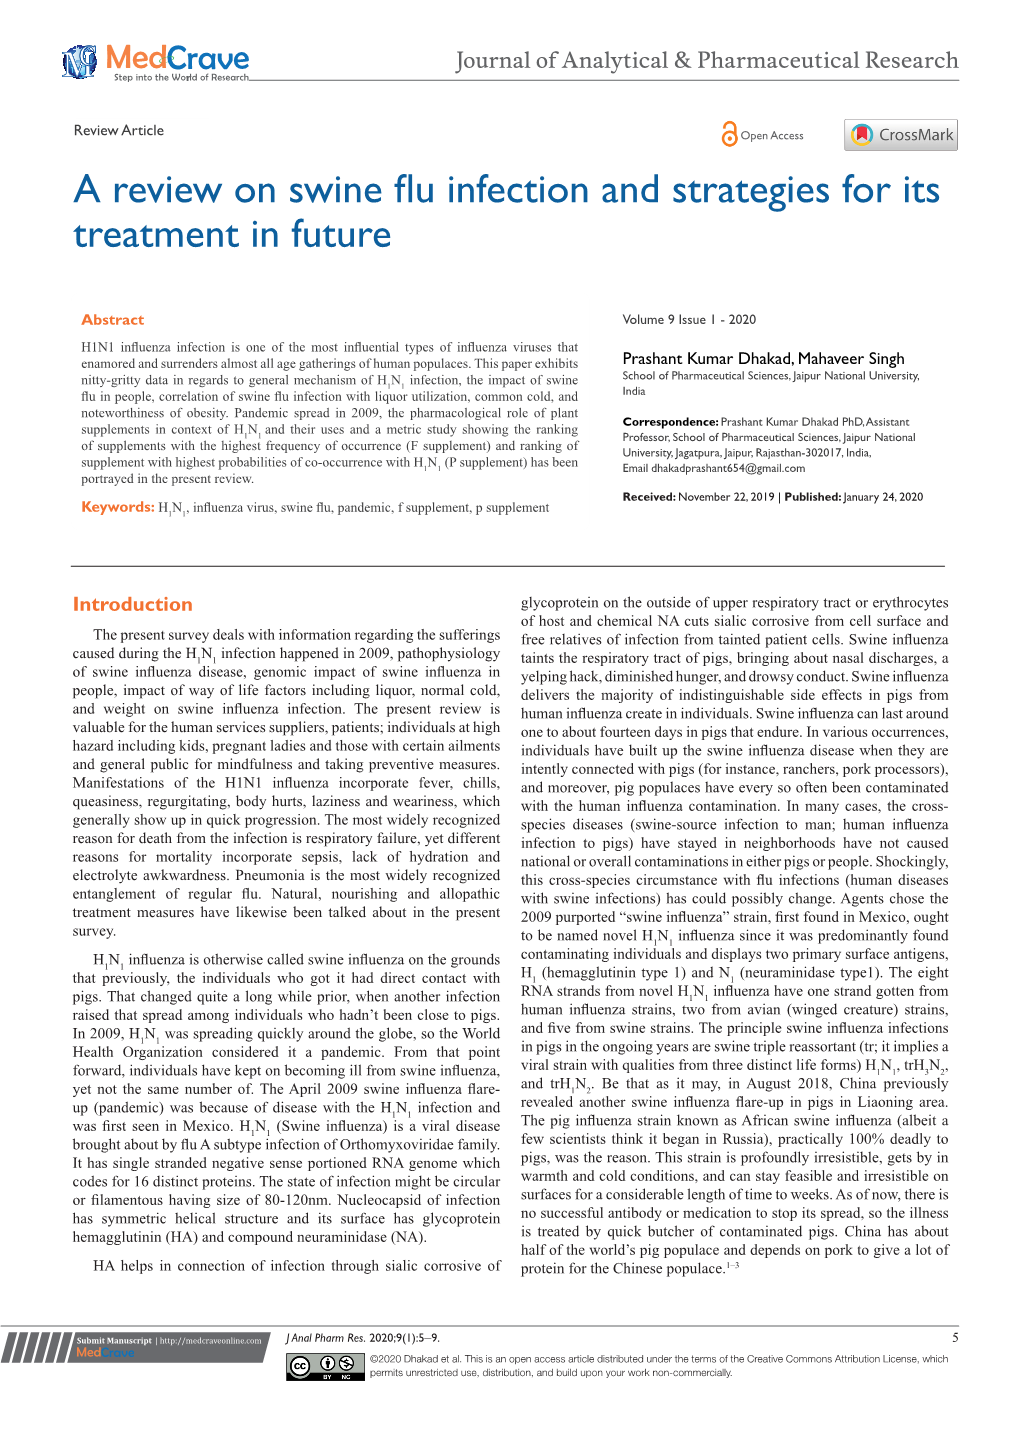 A Review on Swine Flu Infection and Strategies for Its Treatment in Future